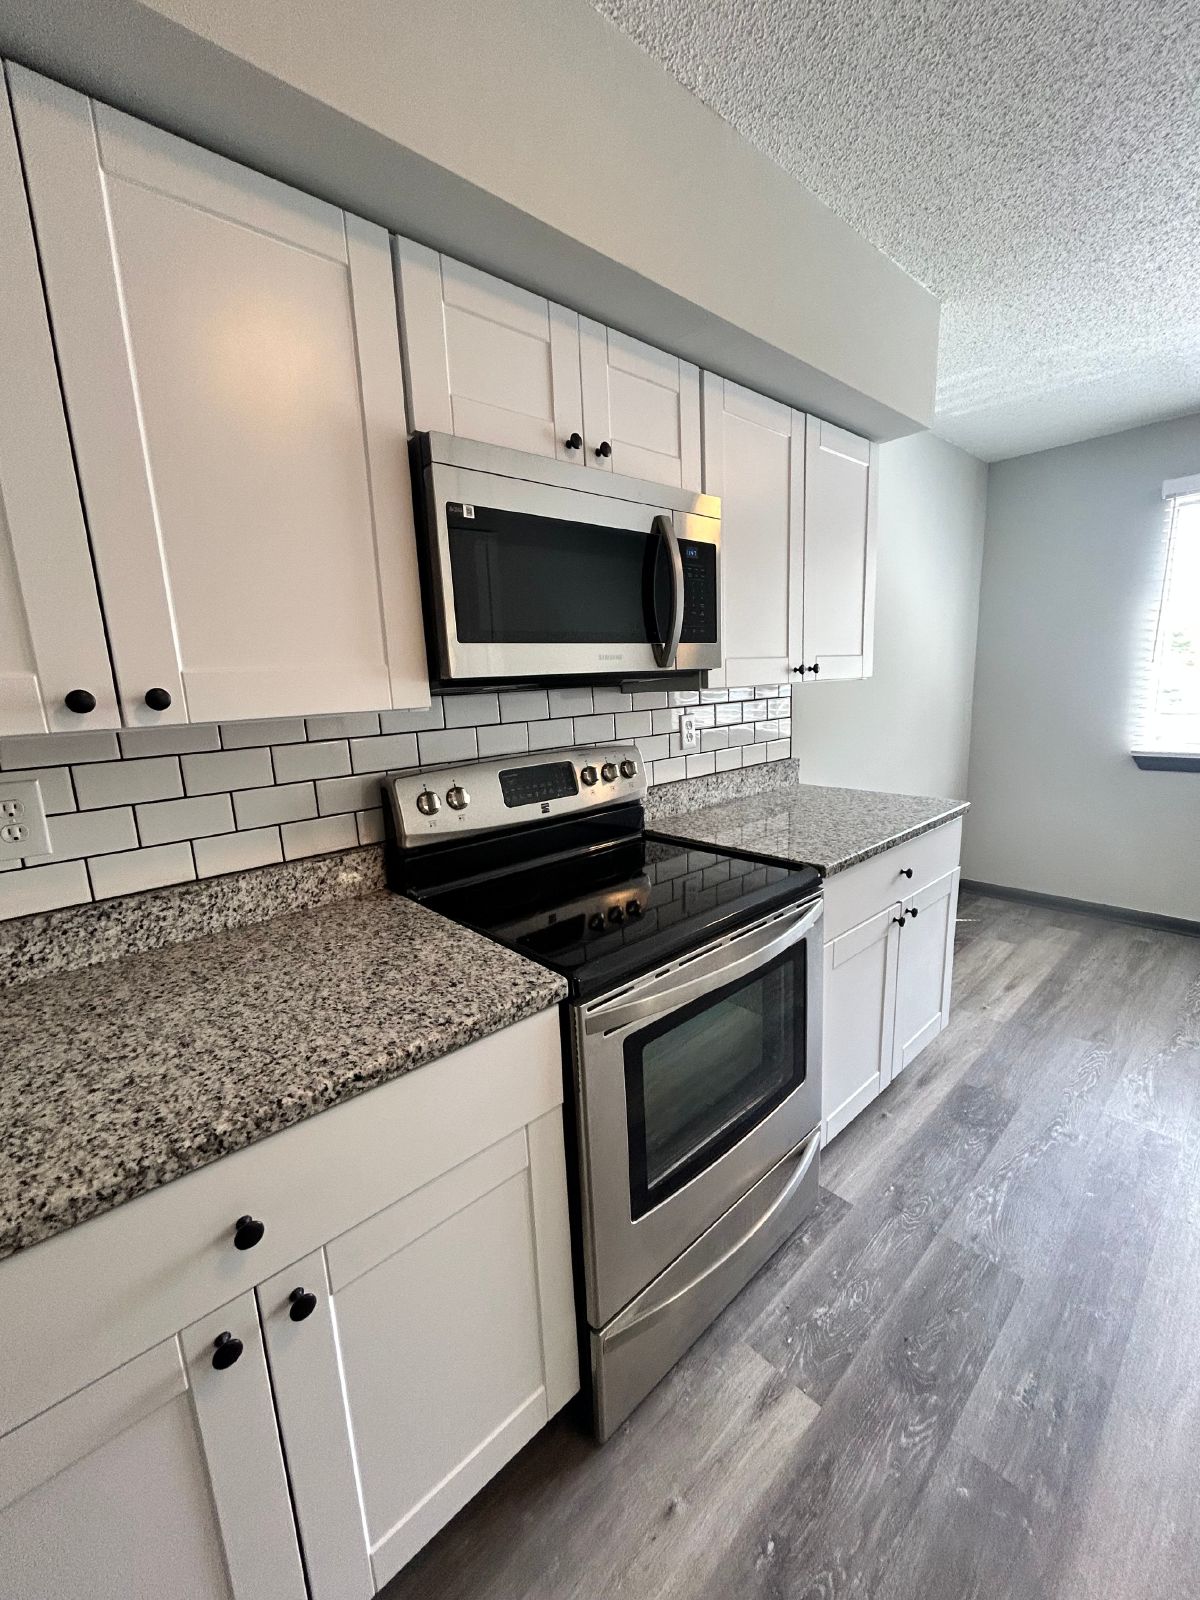 Fully Renovated 2 Bed, 1 Bath, End Unit, Nestled in East Ridge! property image